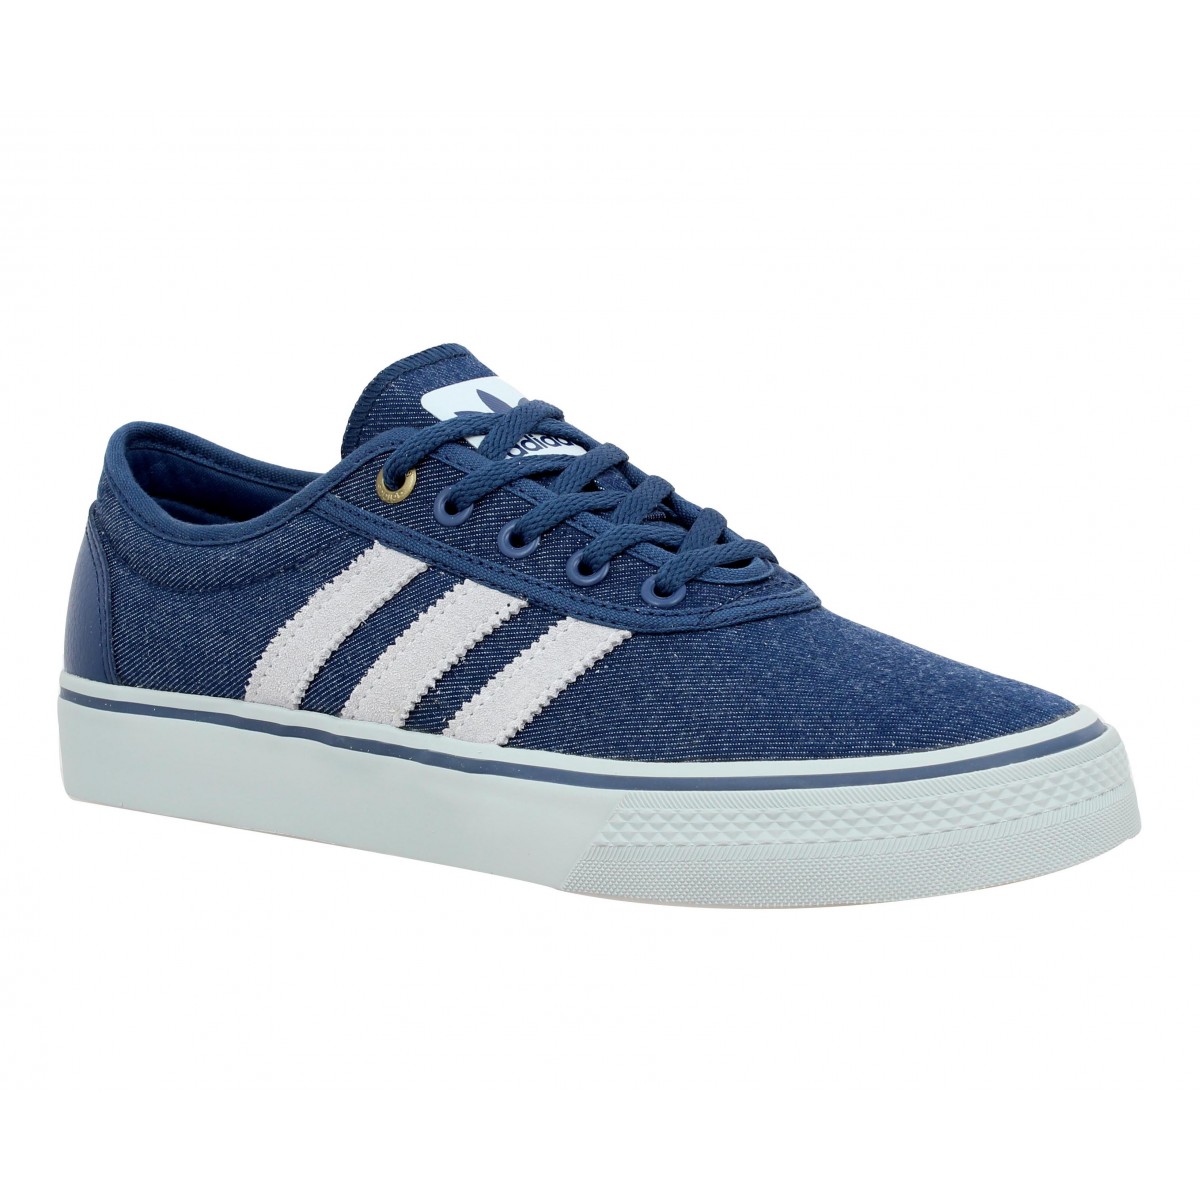 baskets adidas toile homme